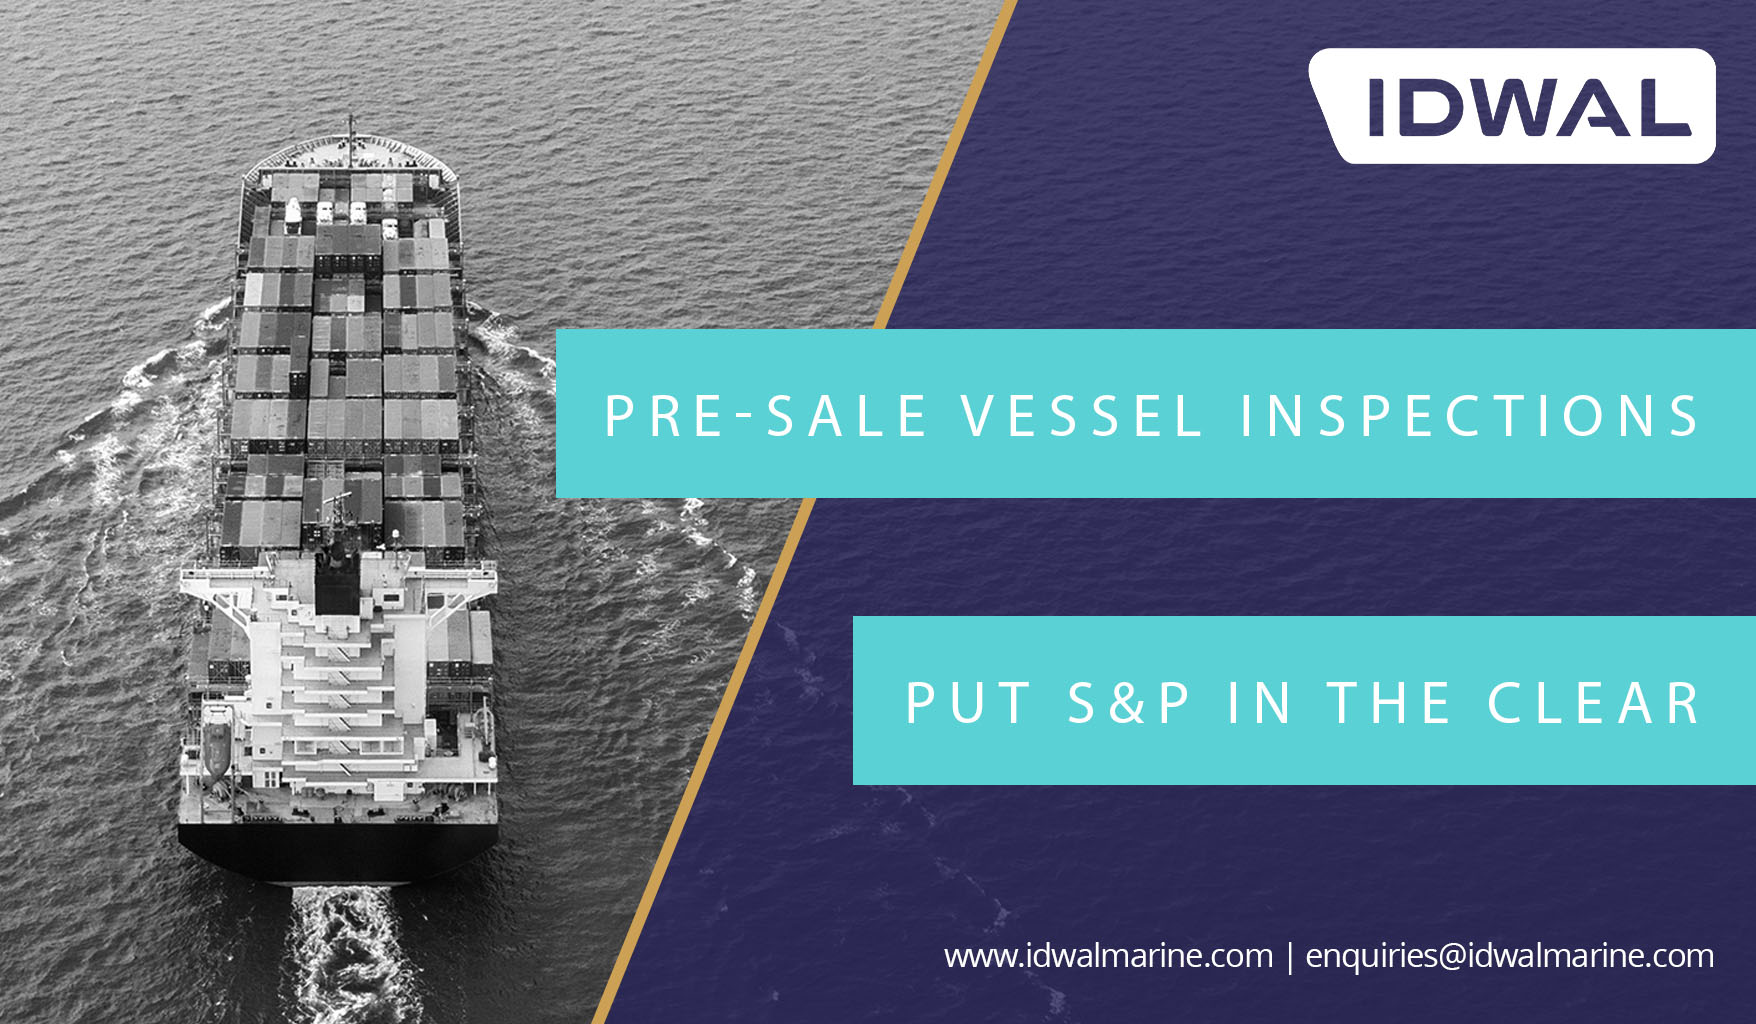 Pre-sale vessel inspections put S&P in the clear